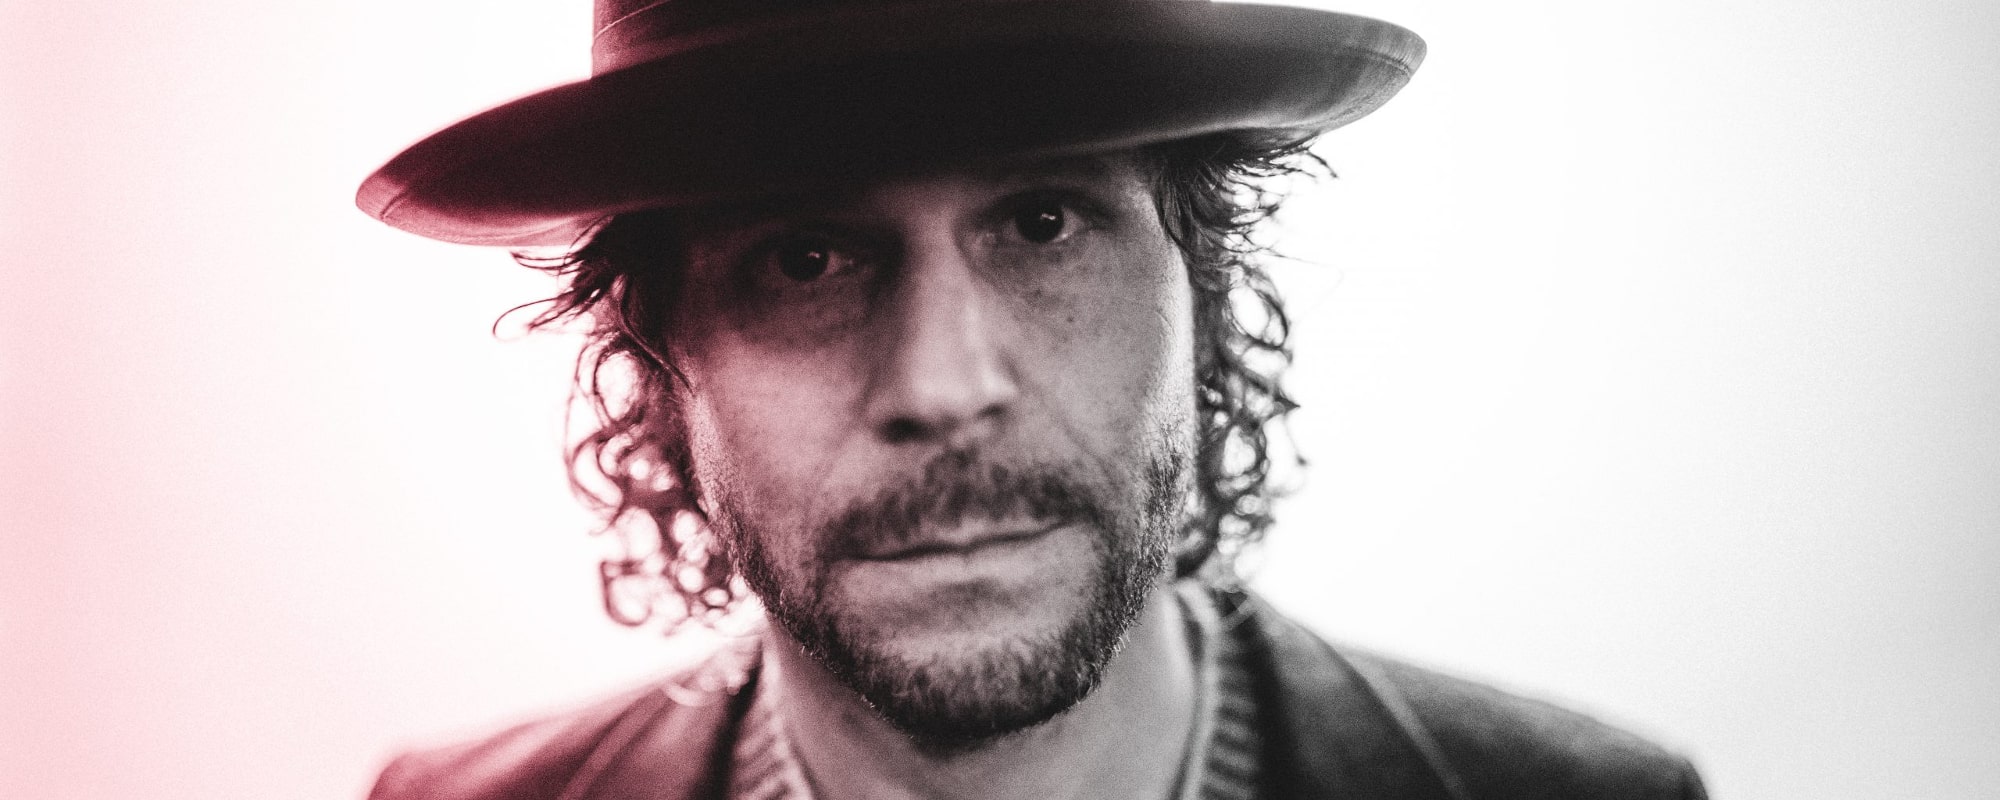 Langhorne Slim Focuses on the Fruits of His Labor in New Album, ‘Strawberry Mansion’